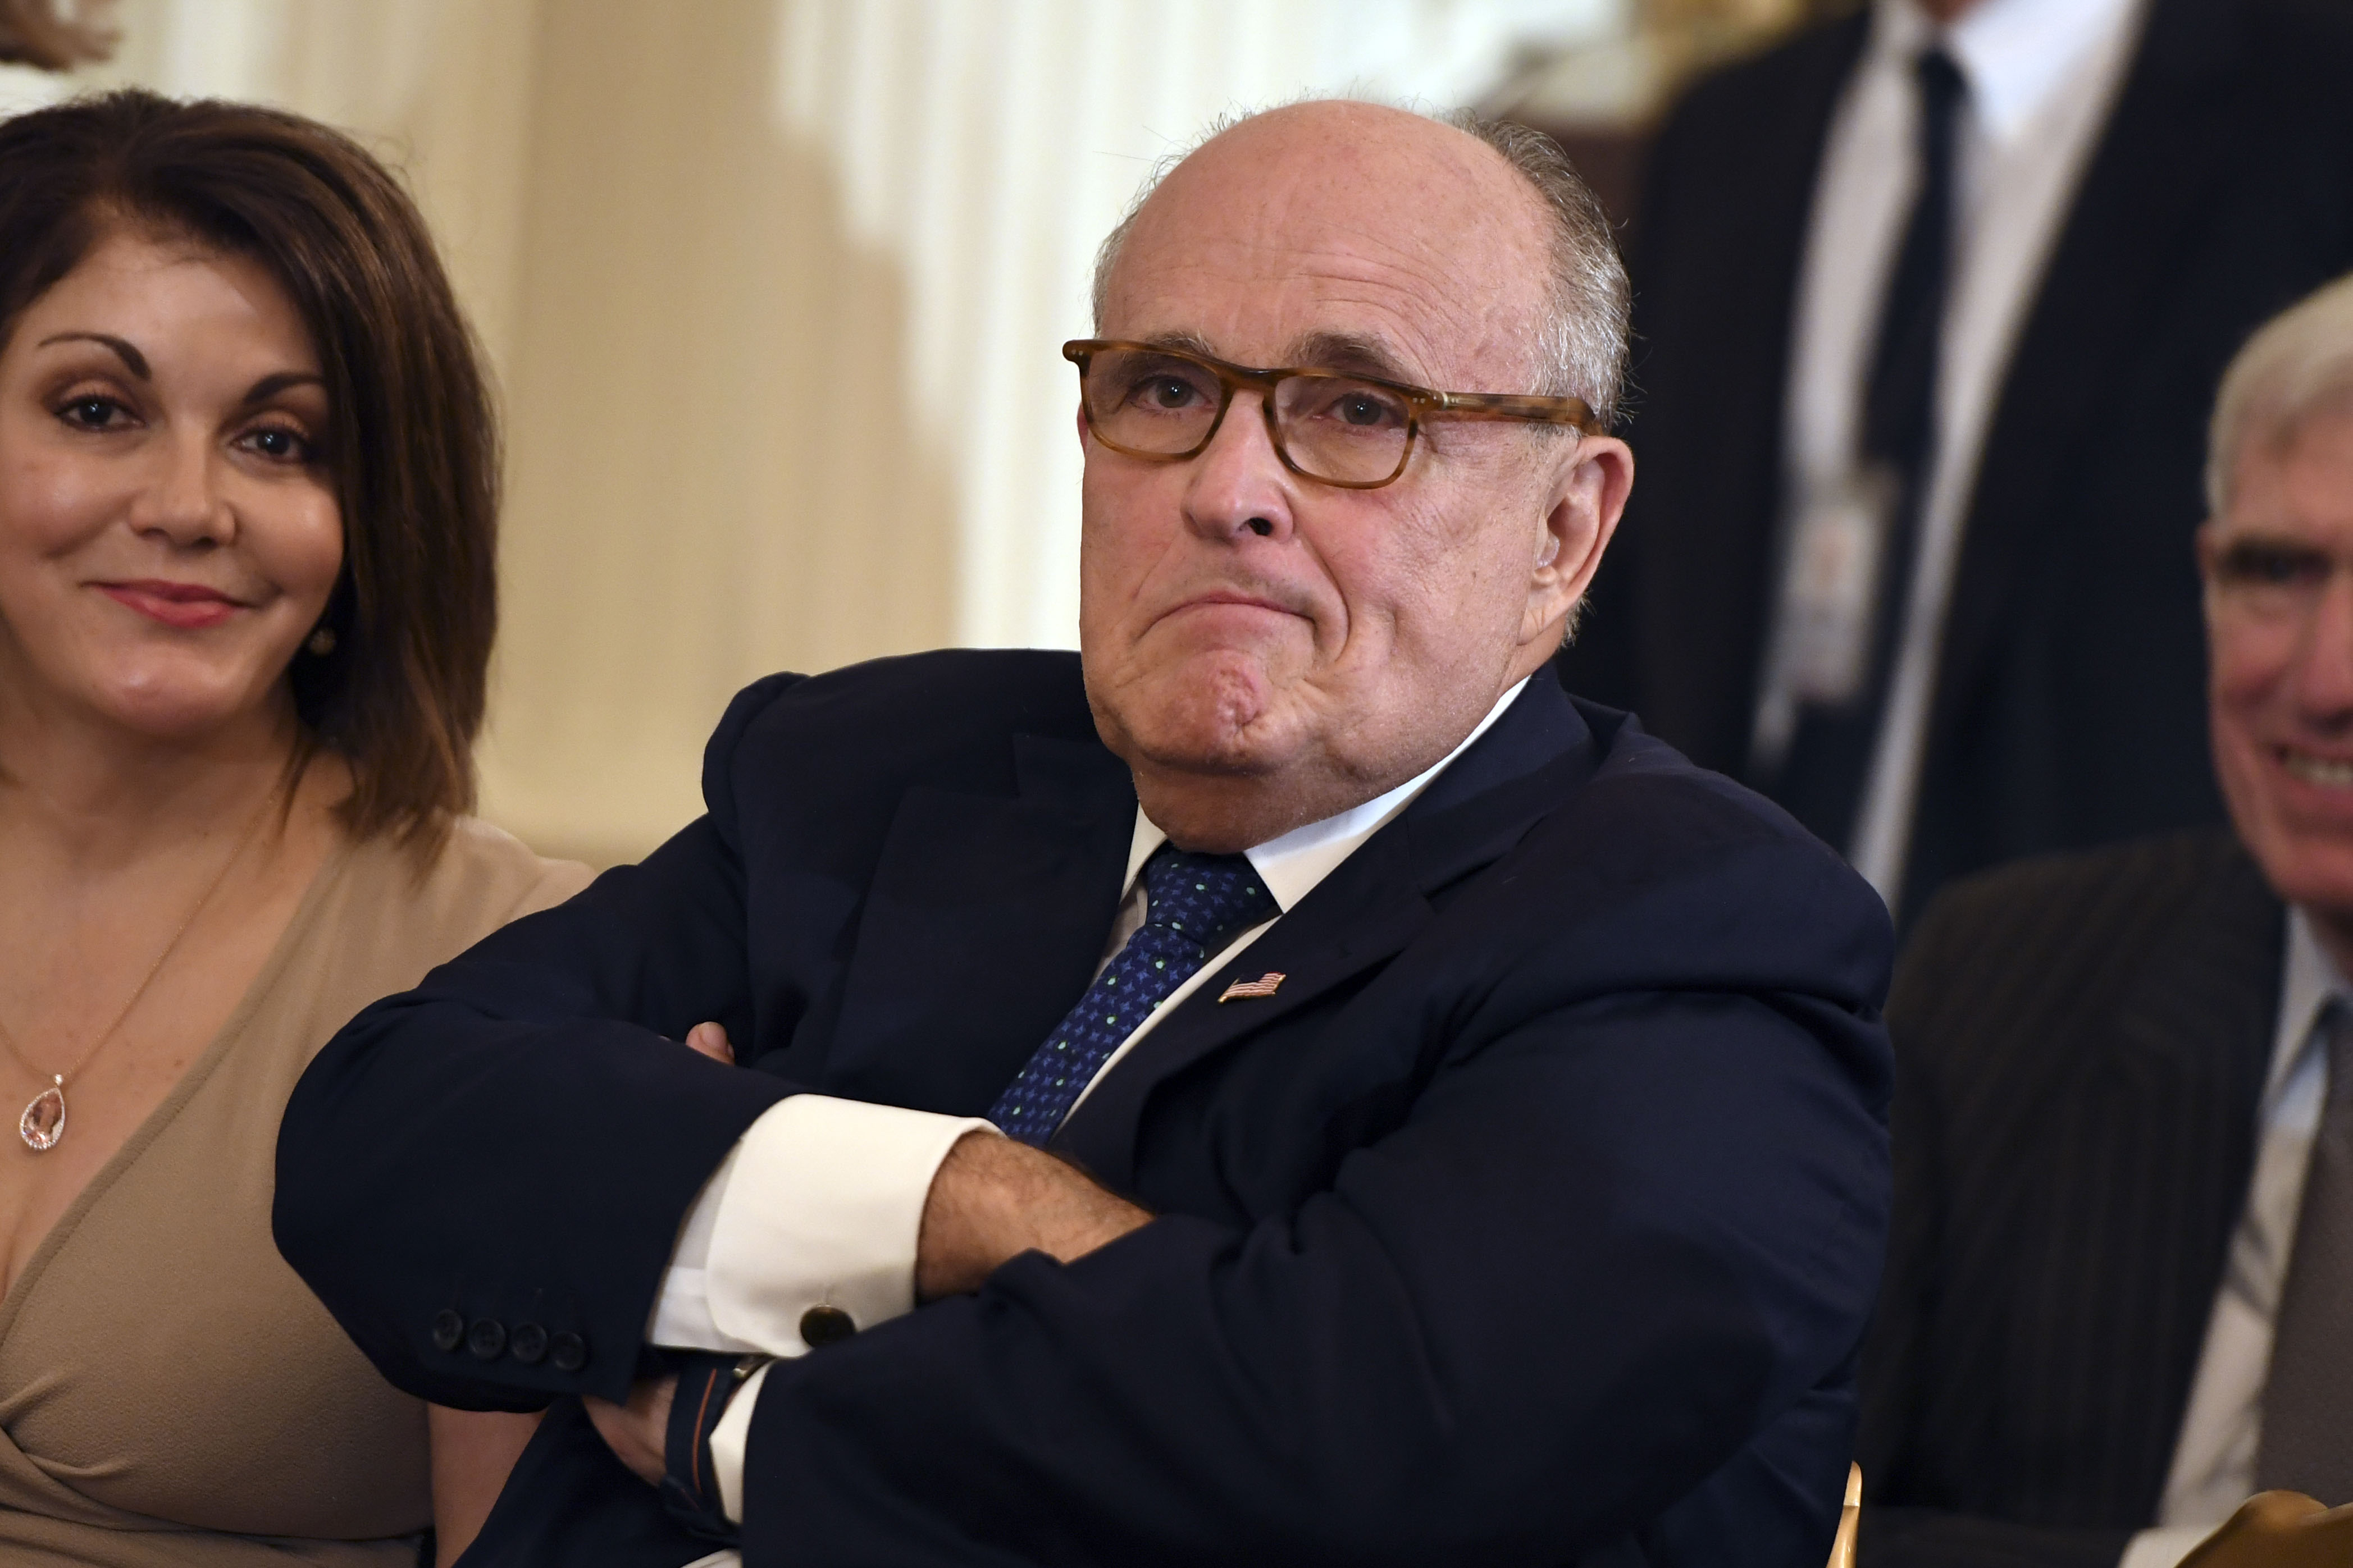 Rudy Giuliani looks on before the US president announces his Supreme Court nominee in the East Room of the White House on July 9, 2018 in Washington, DC. (SAUL LOEB/AFP via Getty Images)